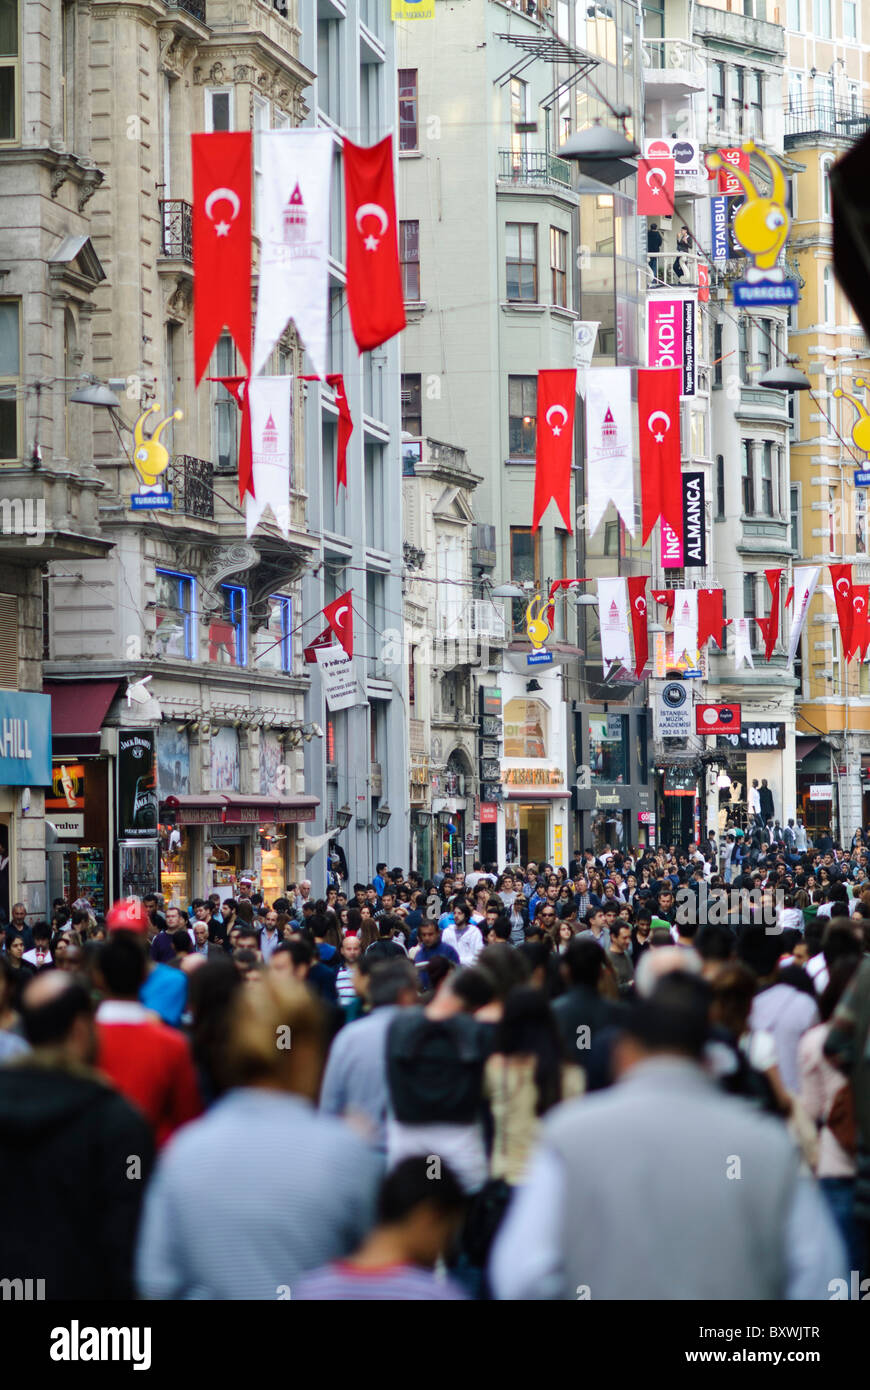 Crowds in the main shopping district of Beyoglu in Istanbul, Turkey. Stock Photo